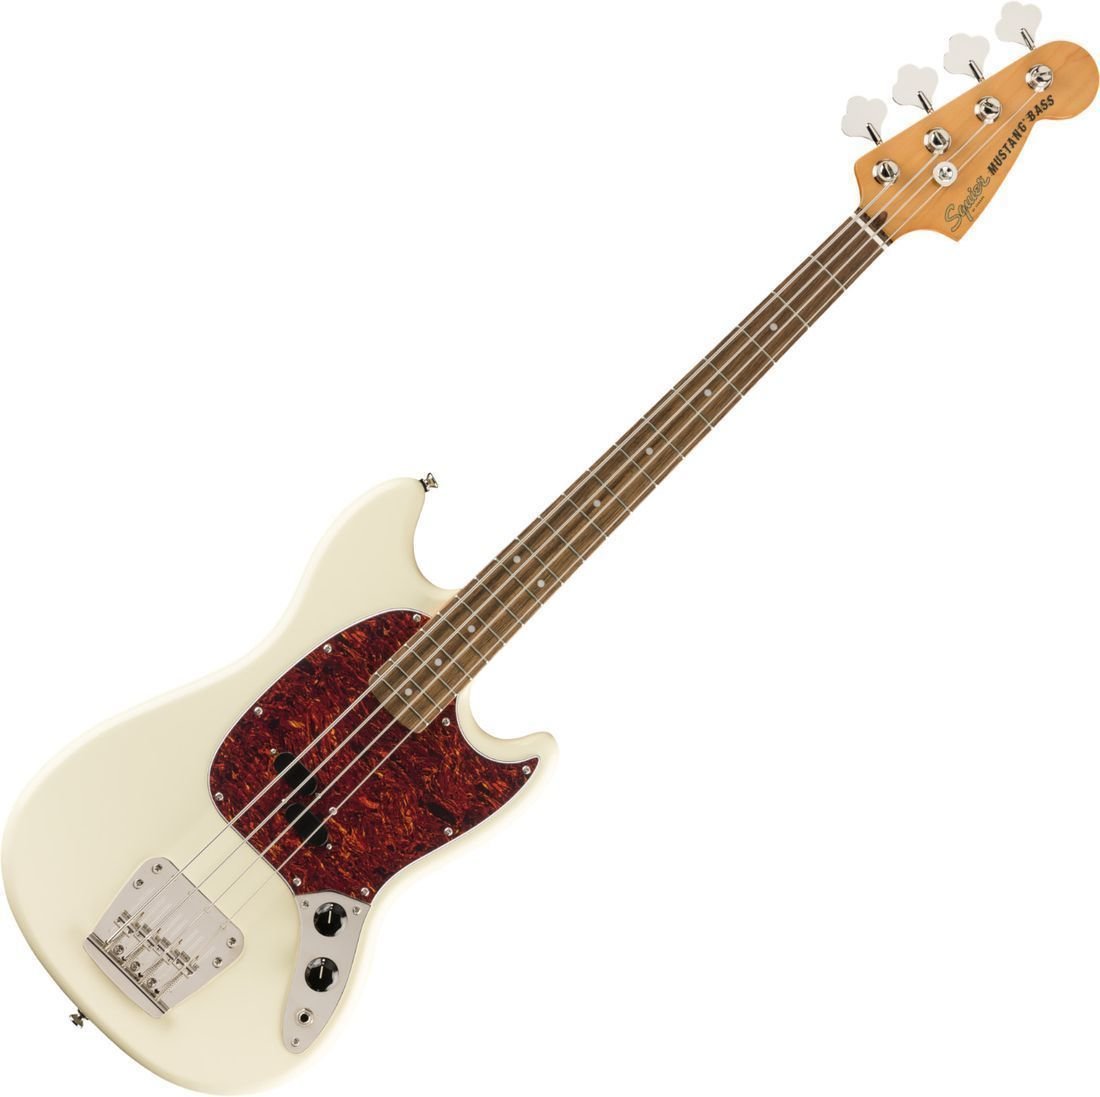 Fender Squier Classic Vibe 60s Mustang Bass LRL Olympic White Fender Squier